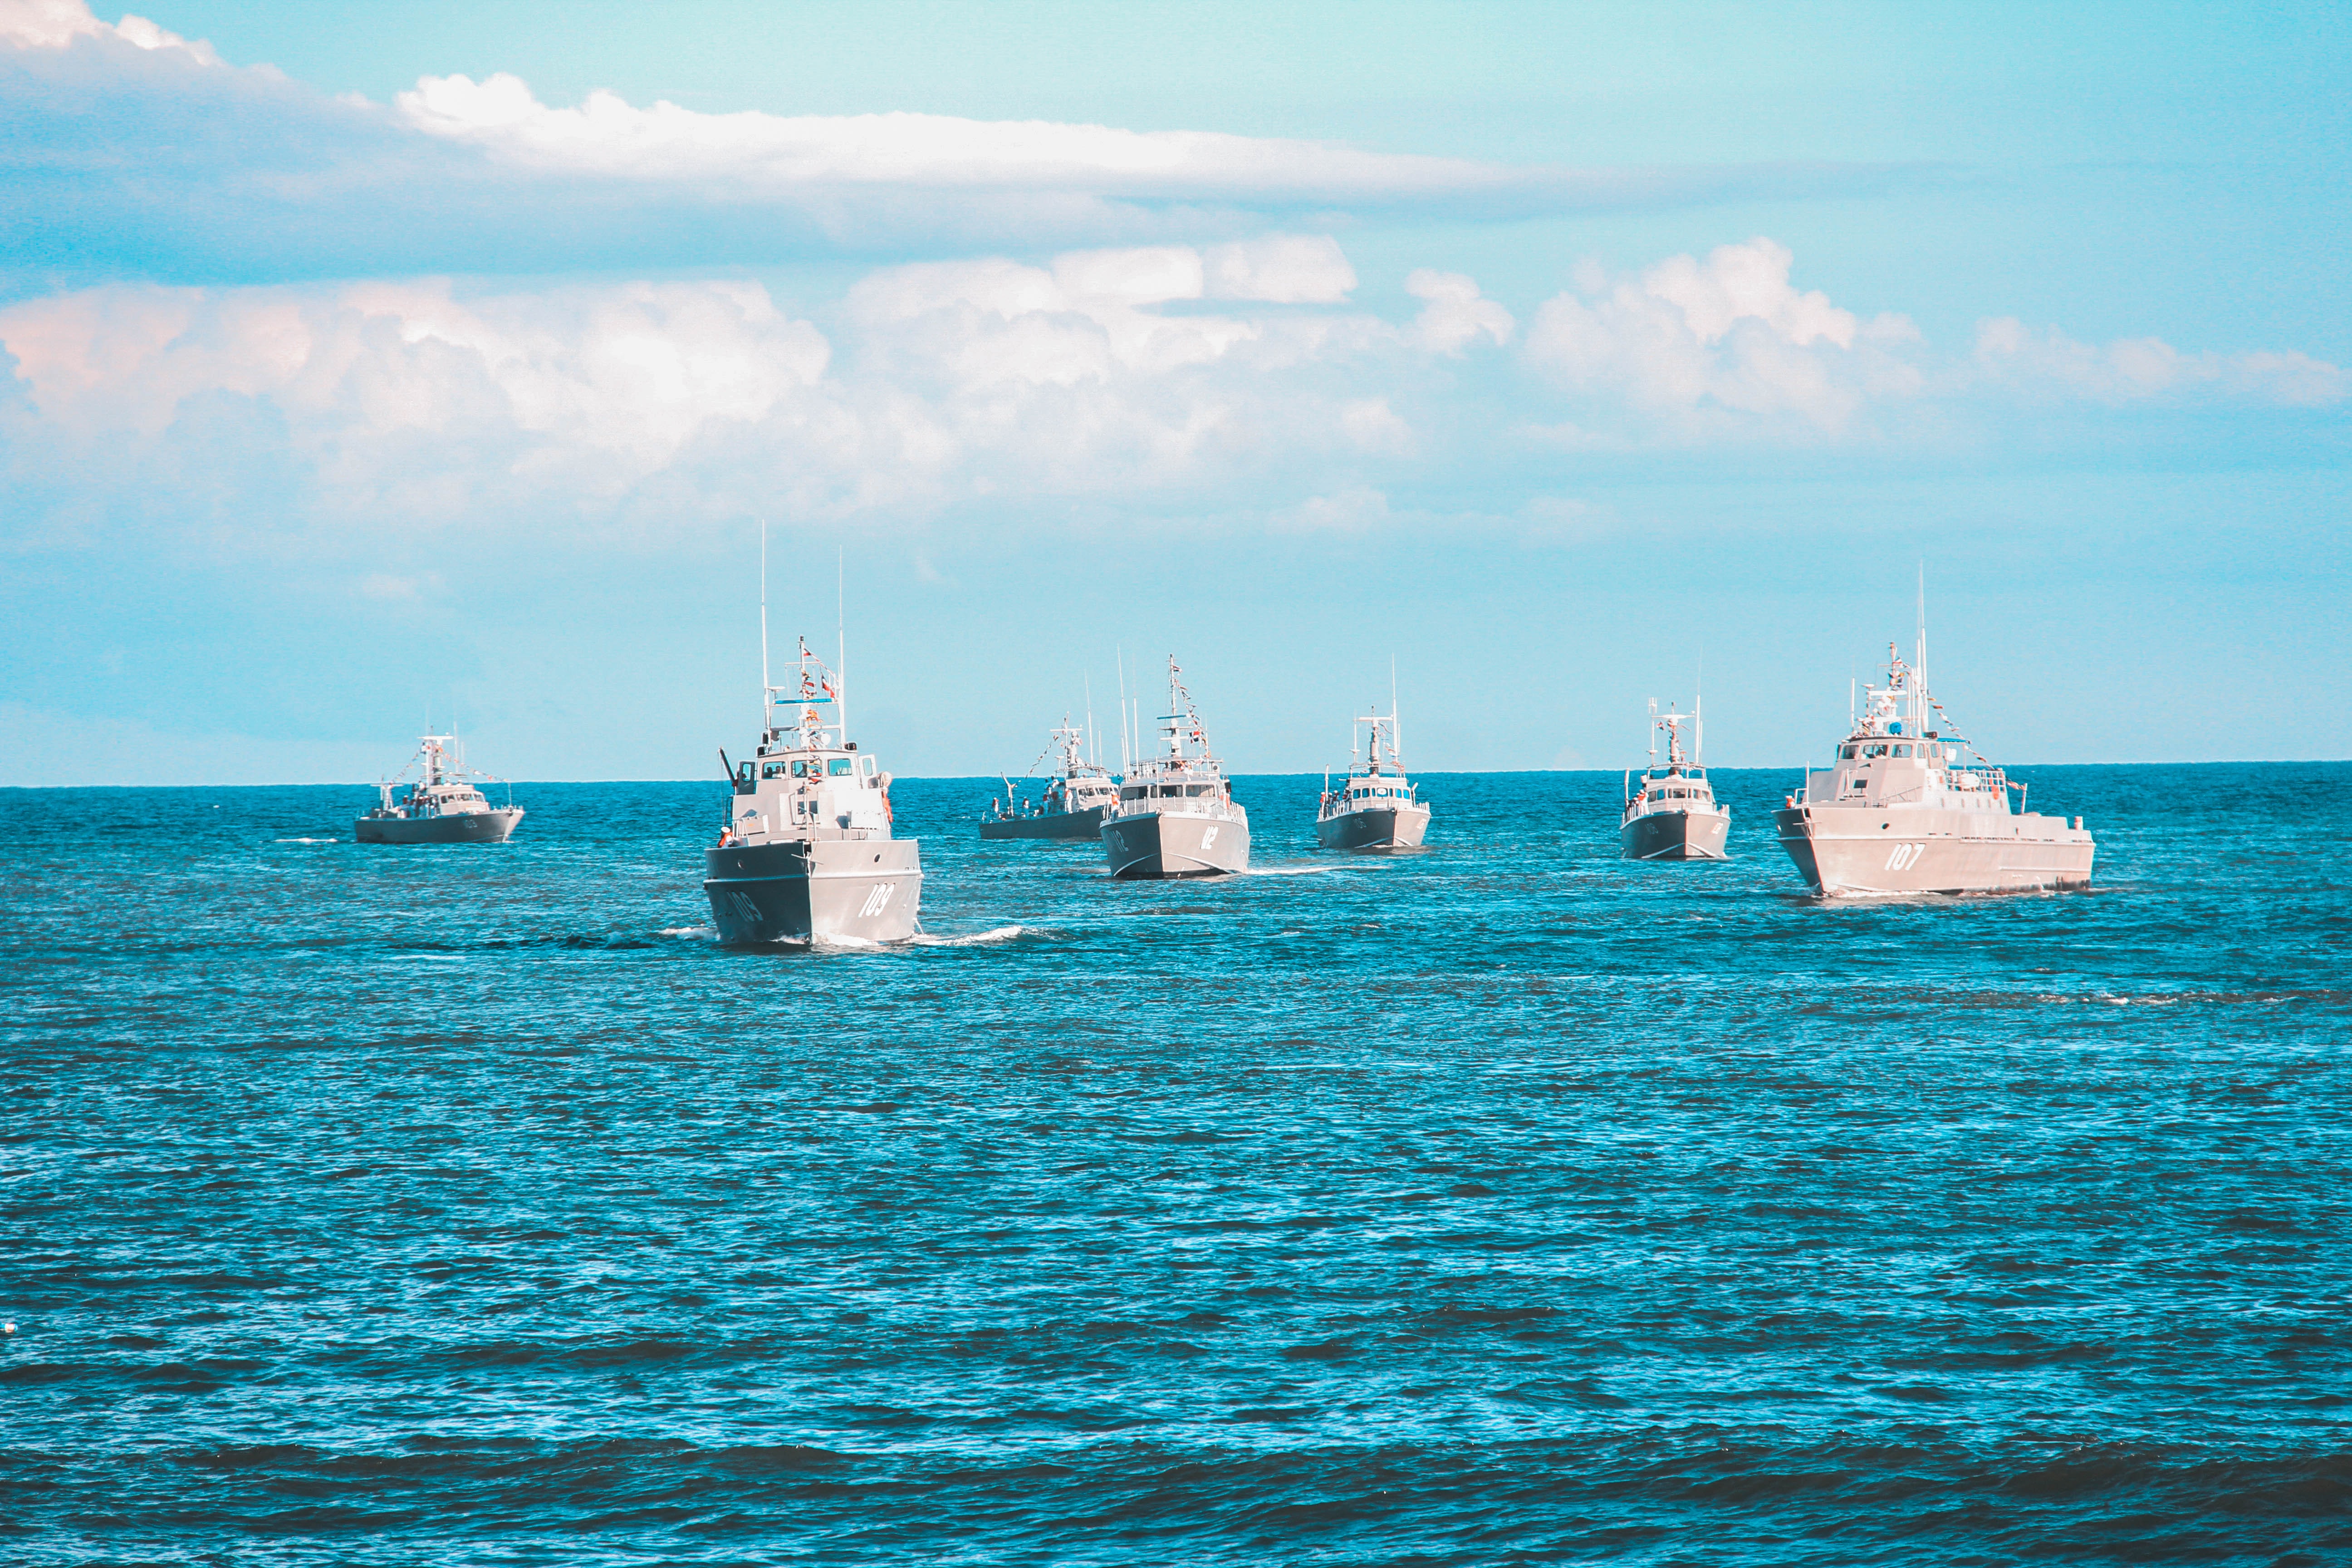 Image of 4 navy ships in the water